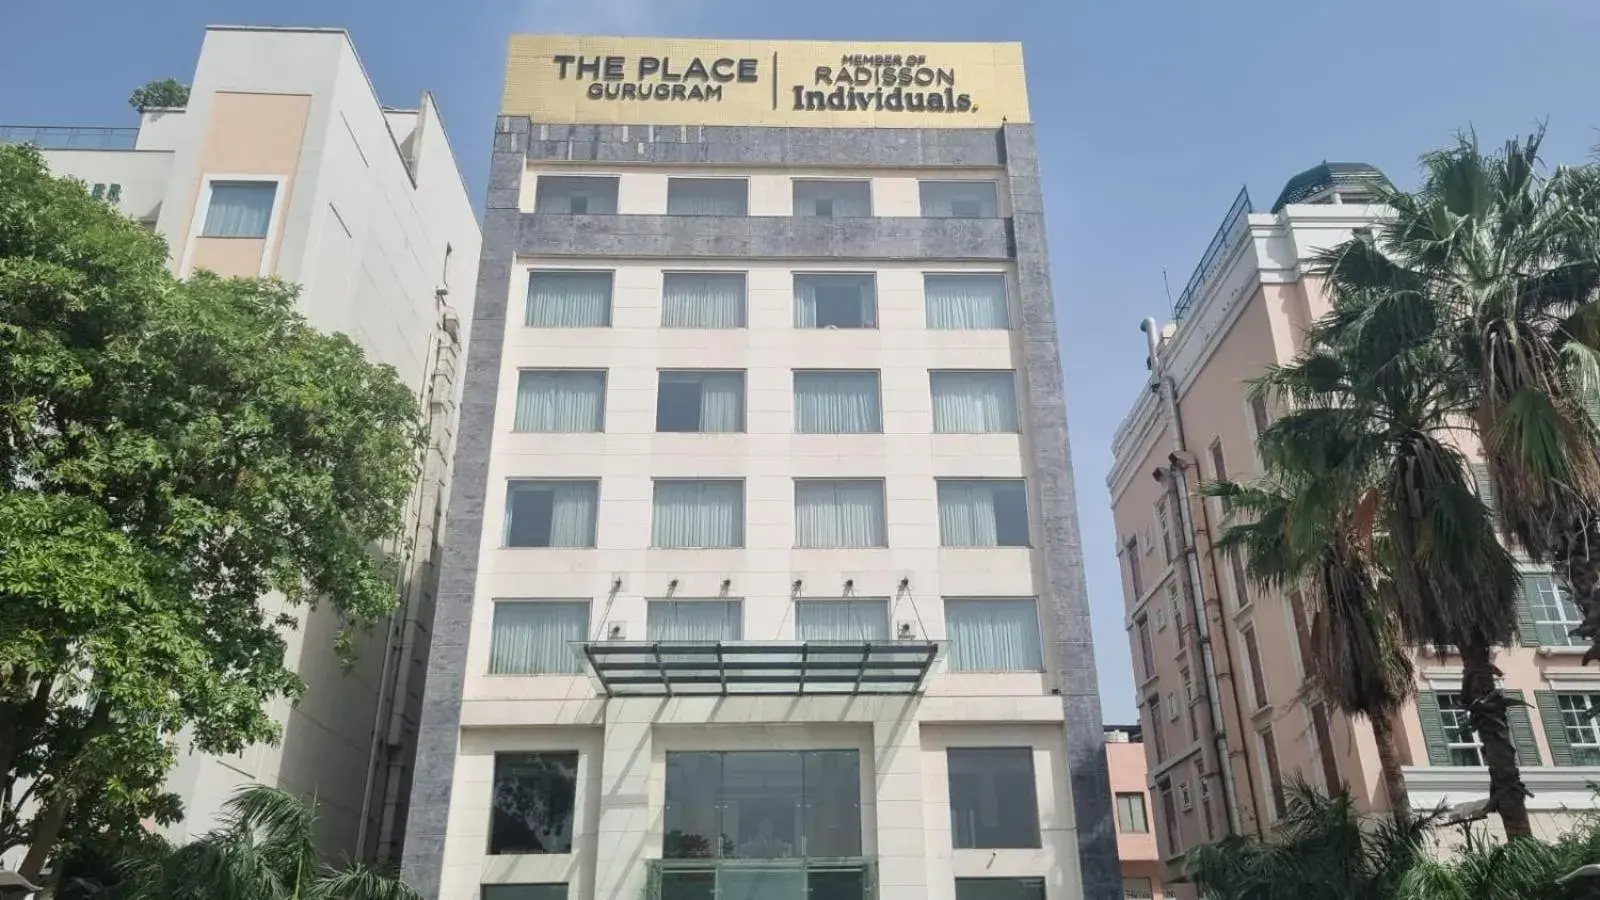 Property Building in The Place Gurugram, a member of Radisson Individuals